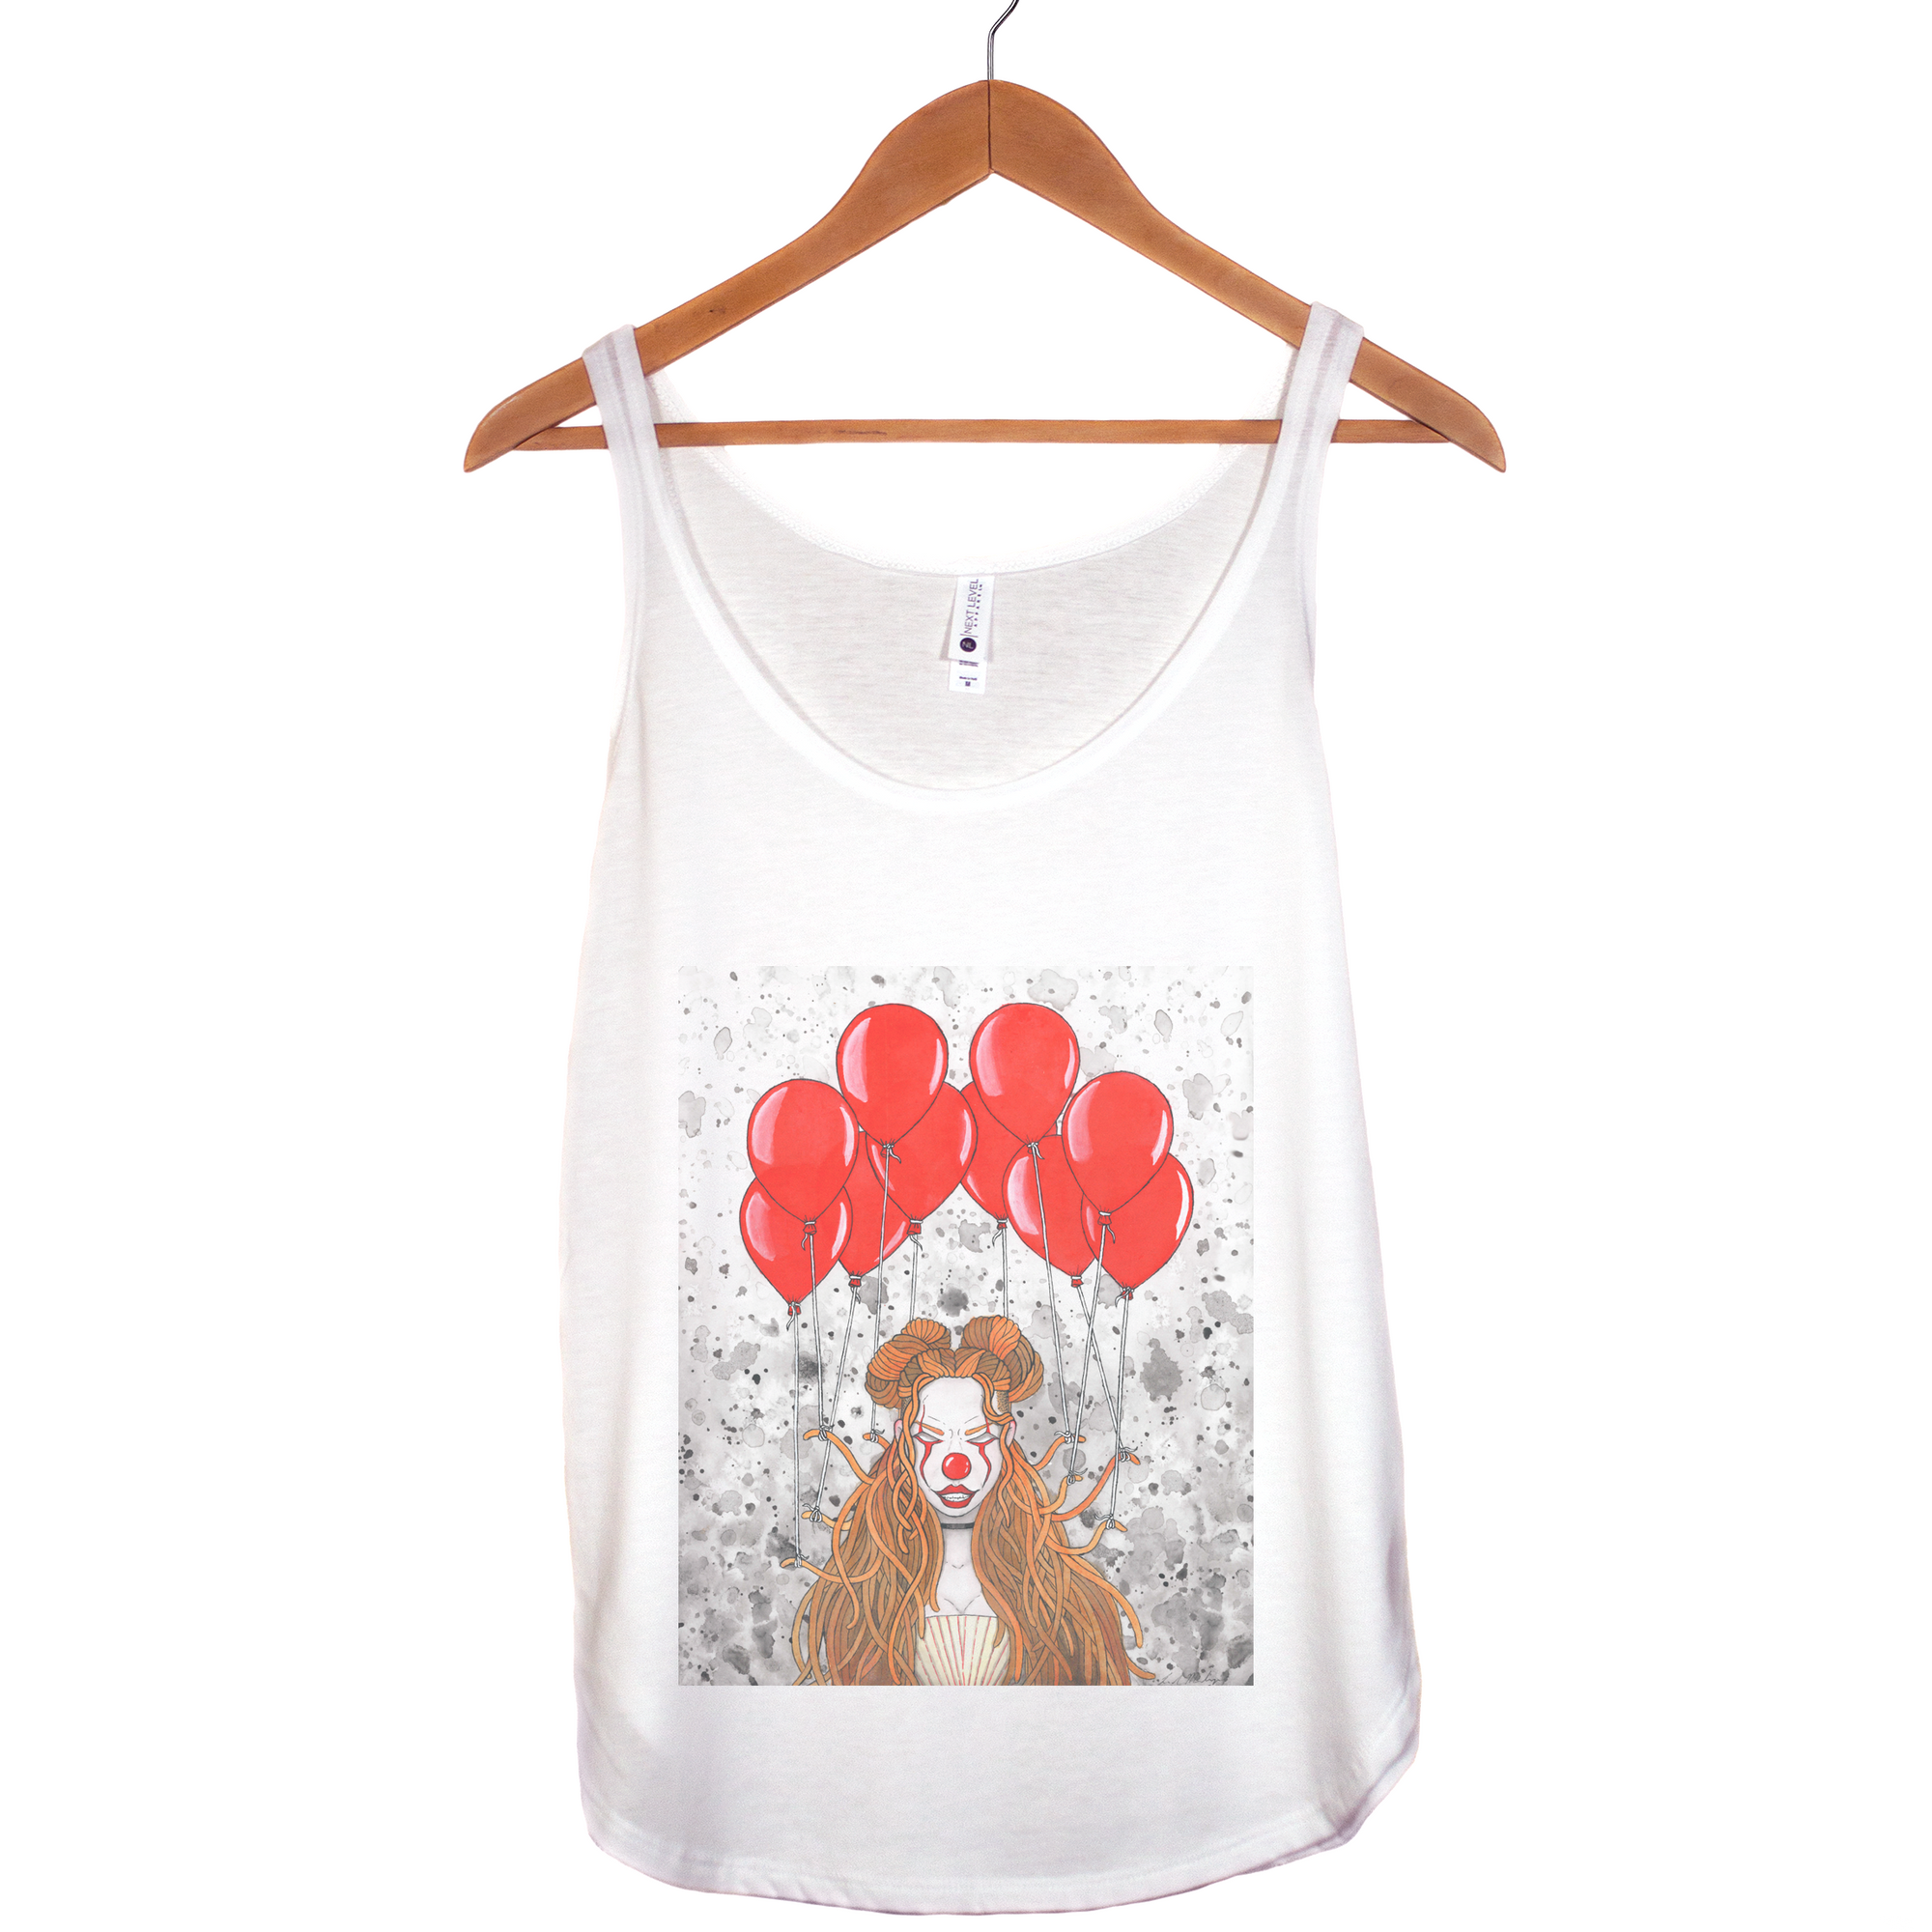 "Penny Wants to Play" - Triblend Tank